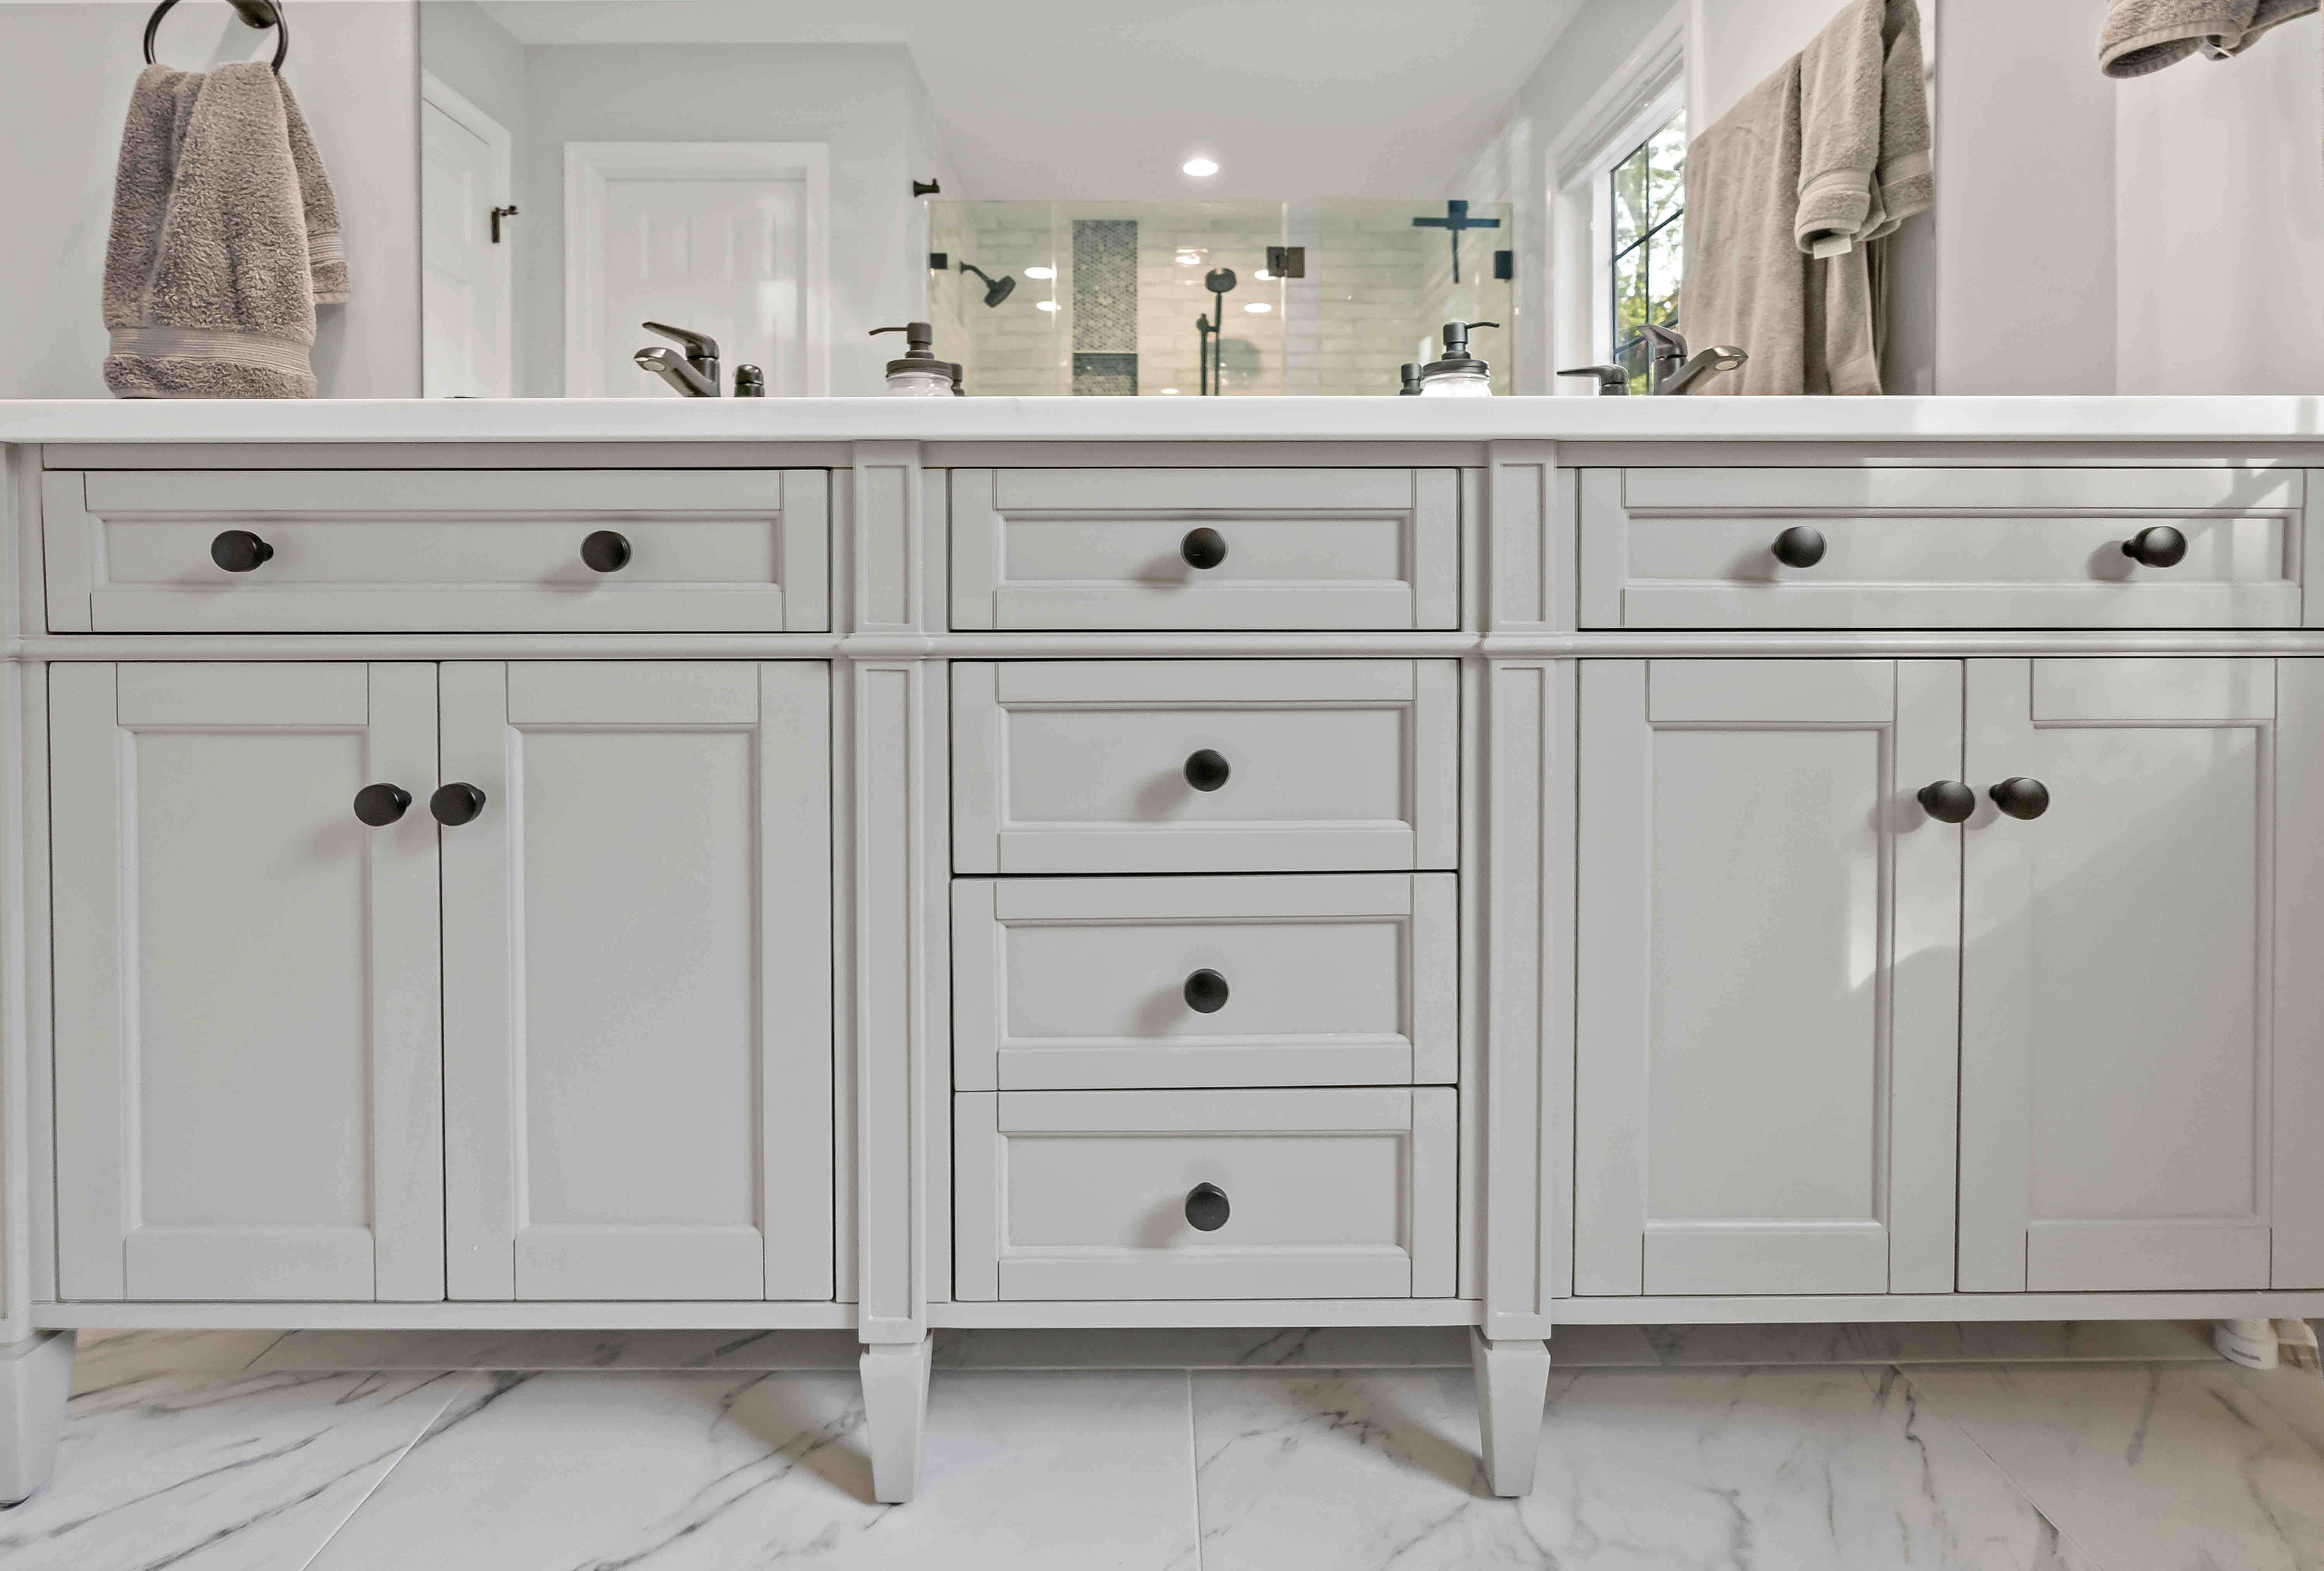 Double sink and white cabinetry in bathroom